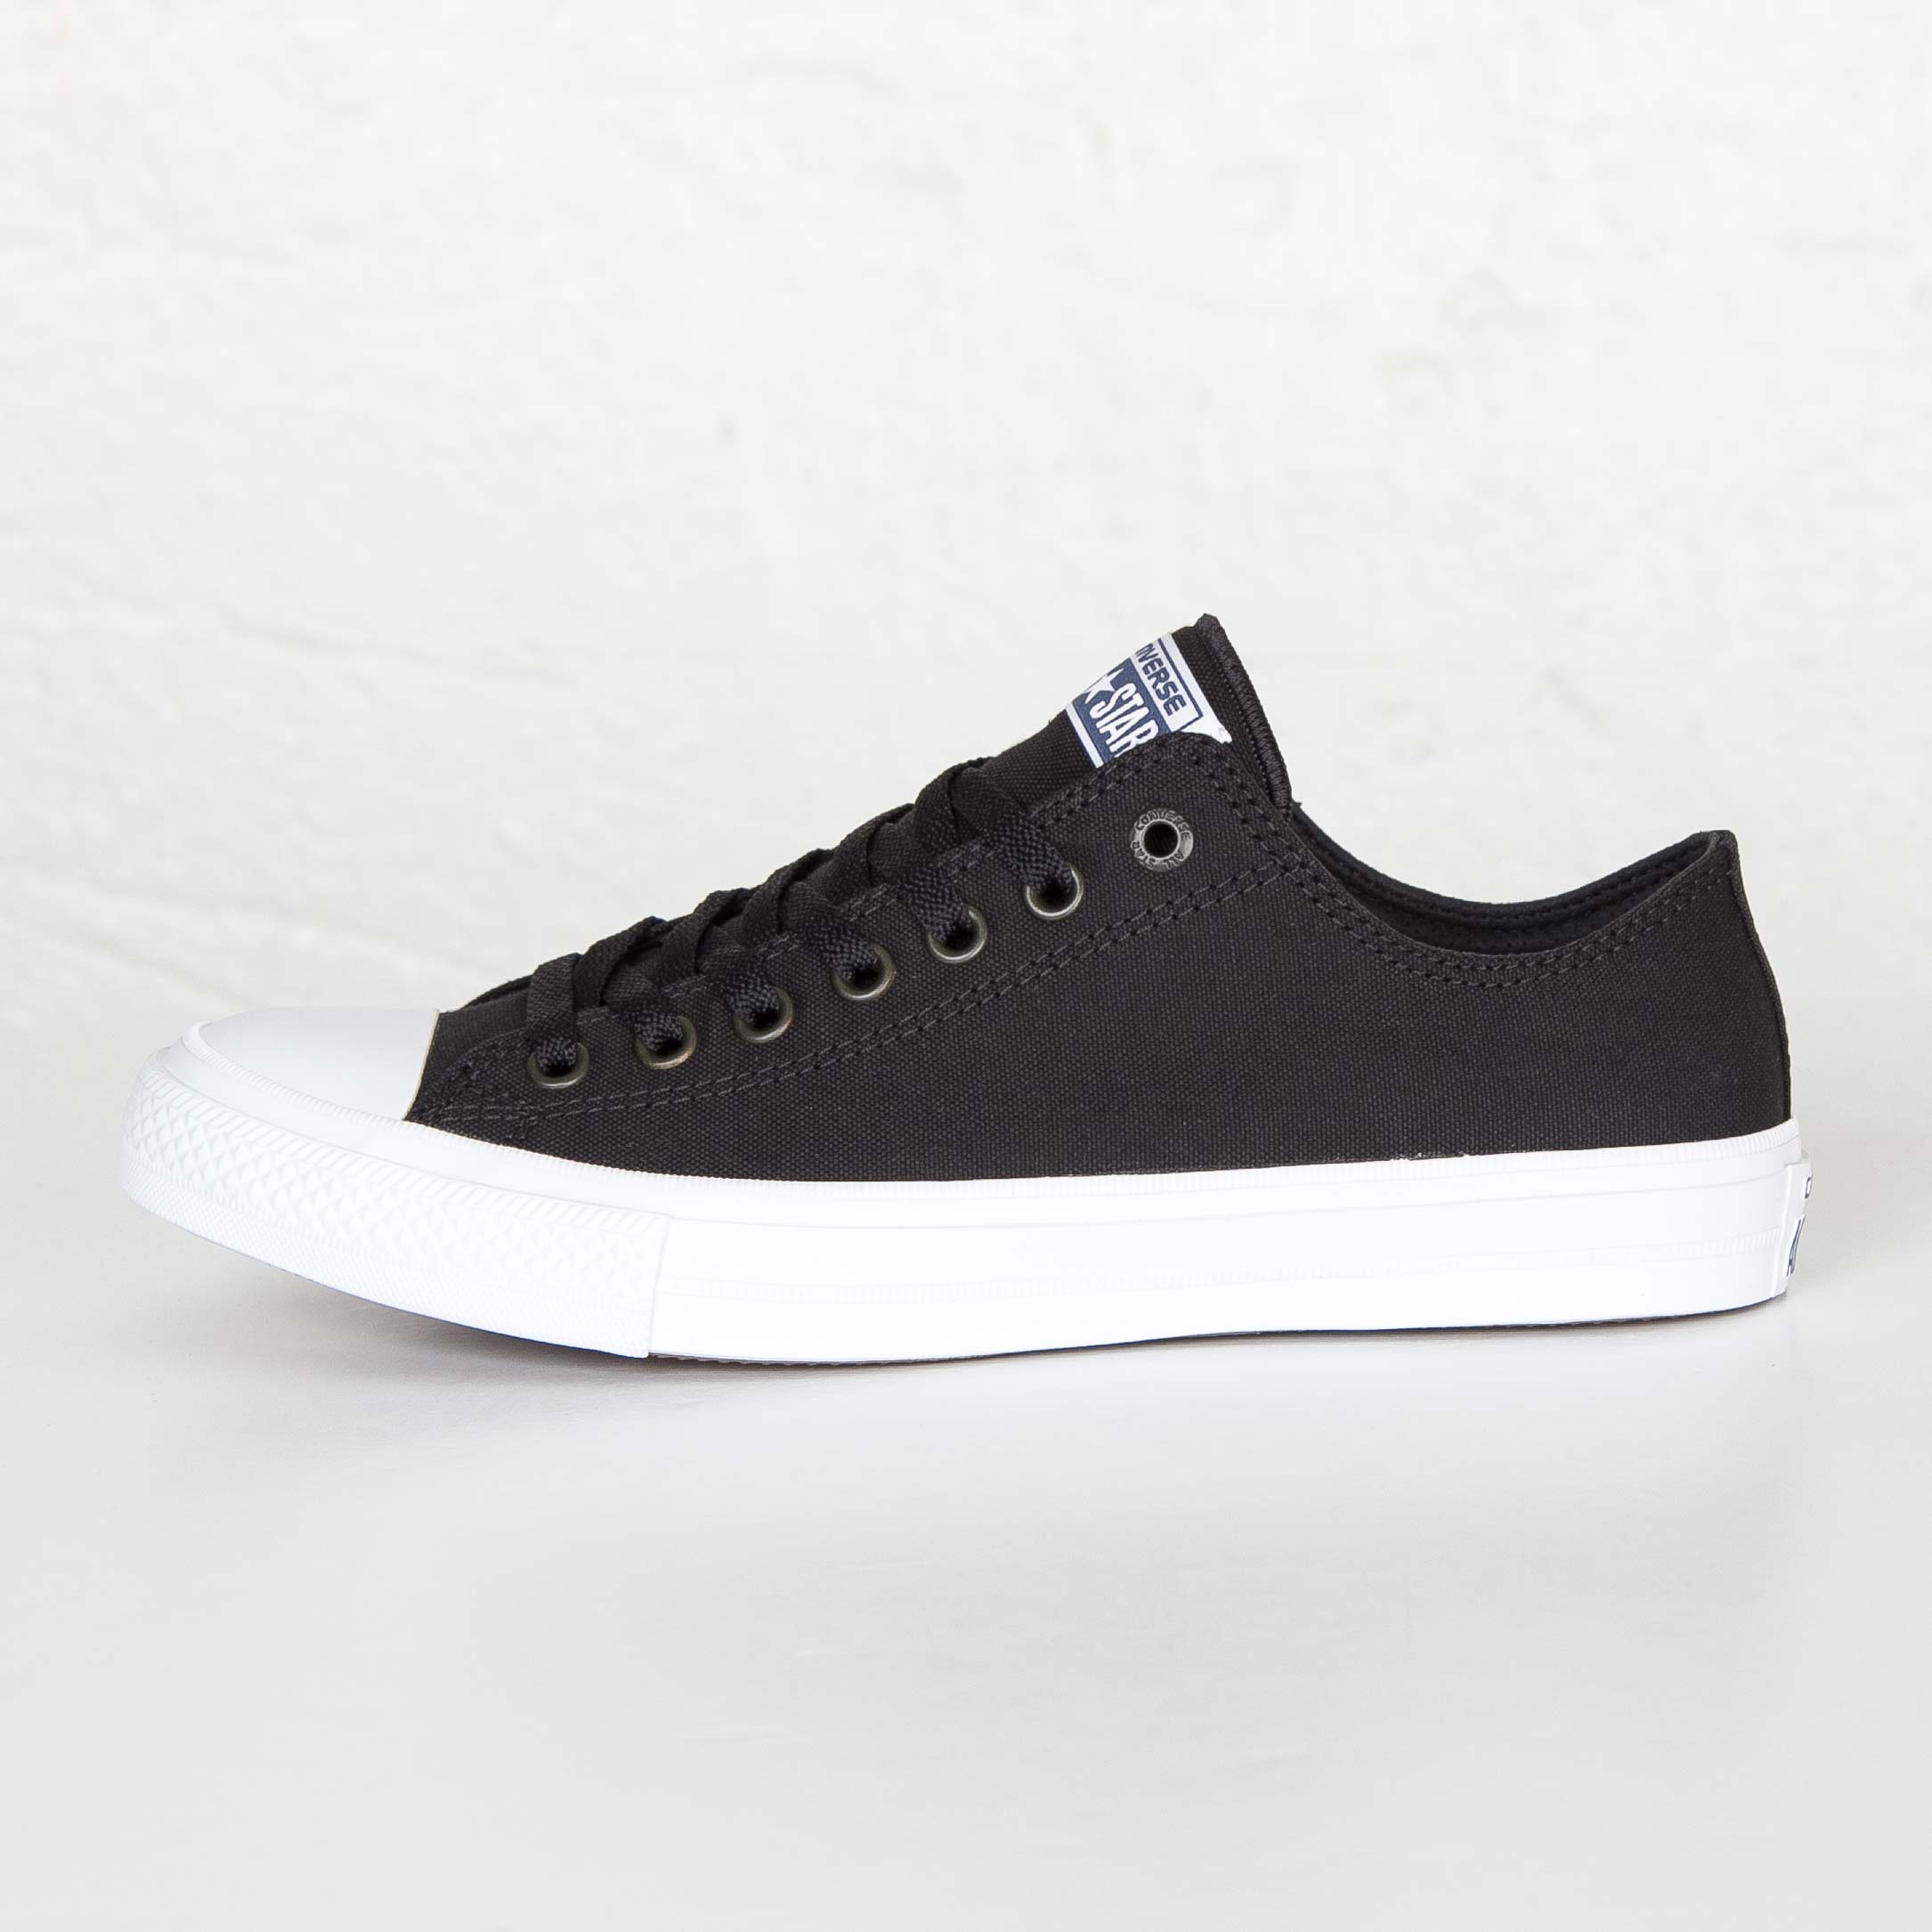 ramp Penelope Defilé Converse Chuck Taylor All Star II OX Low Top Black – PRIVATE SNEAKERS